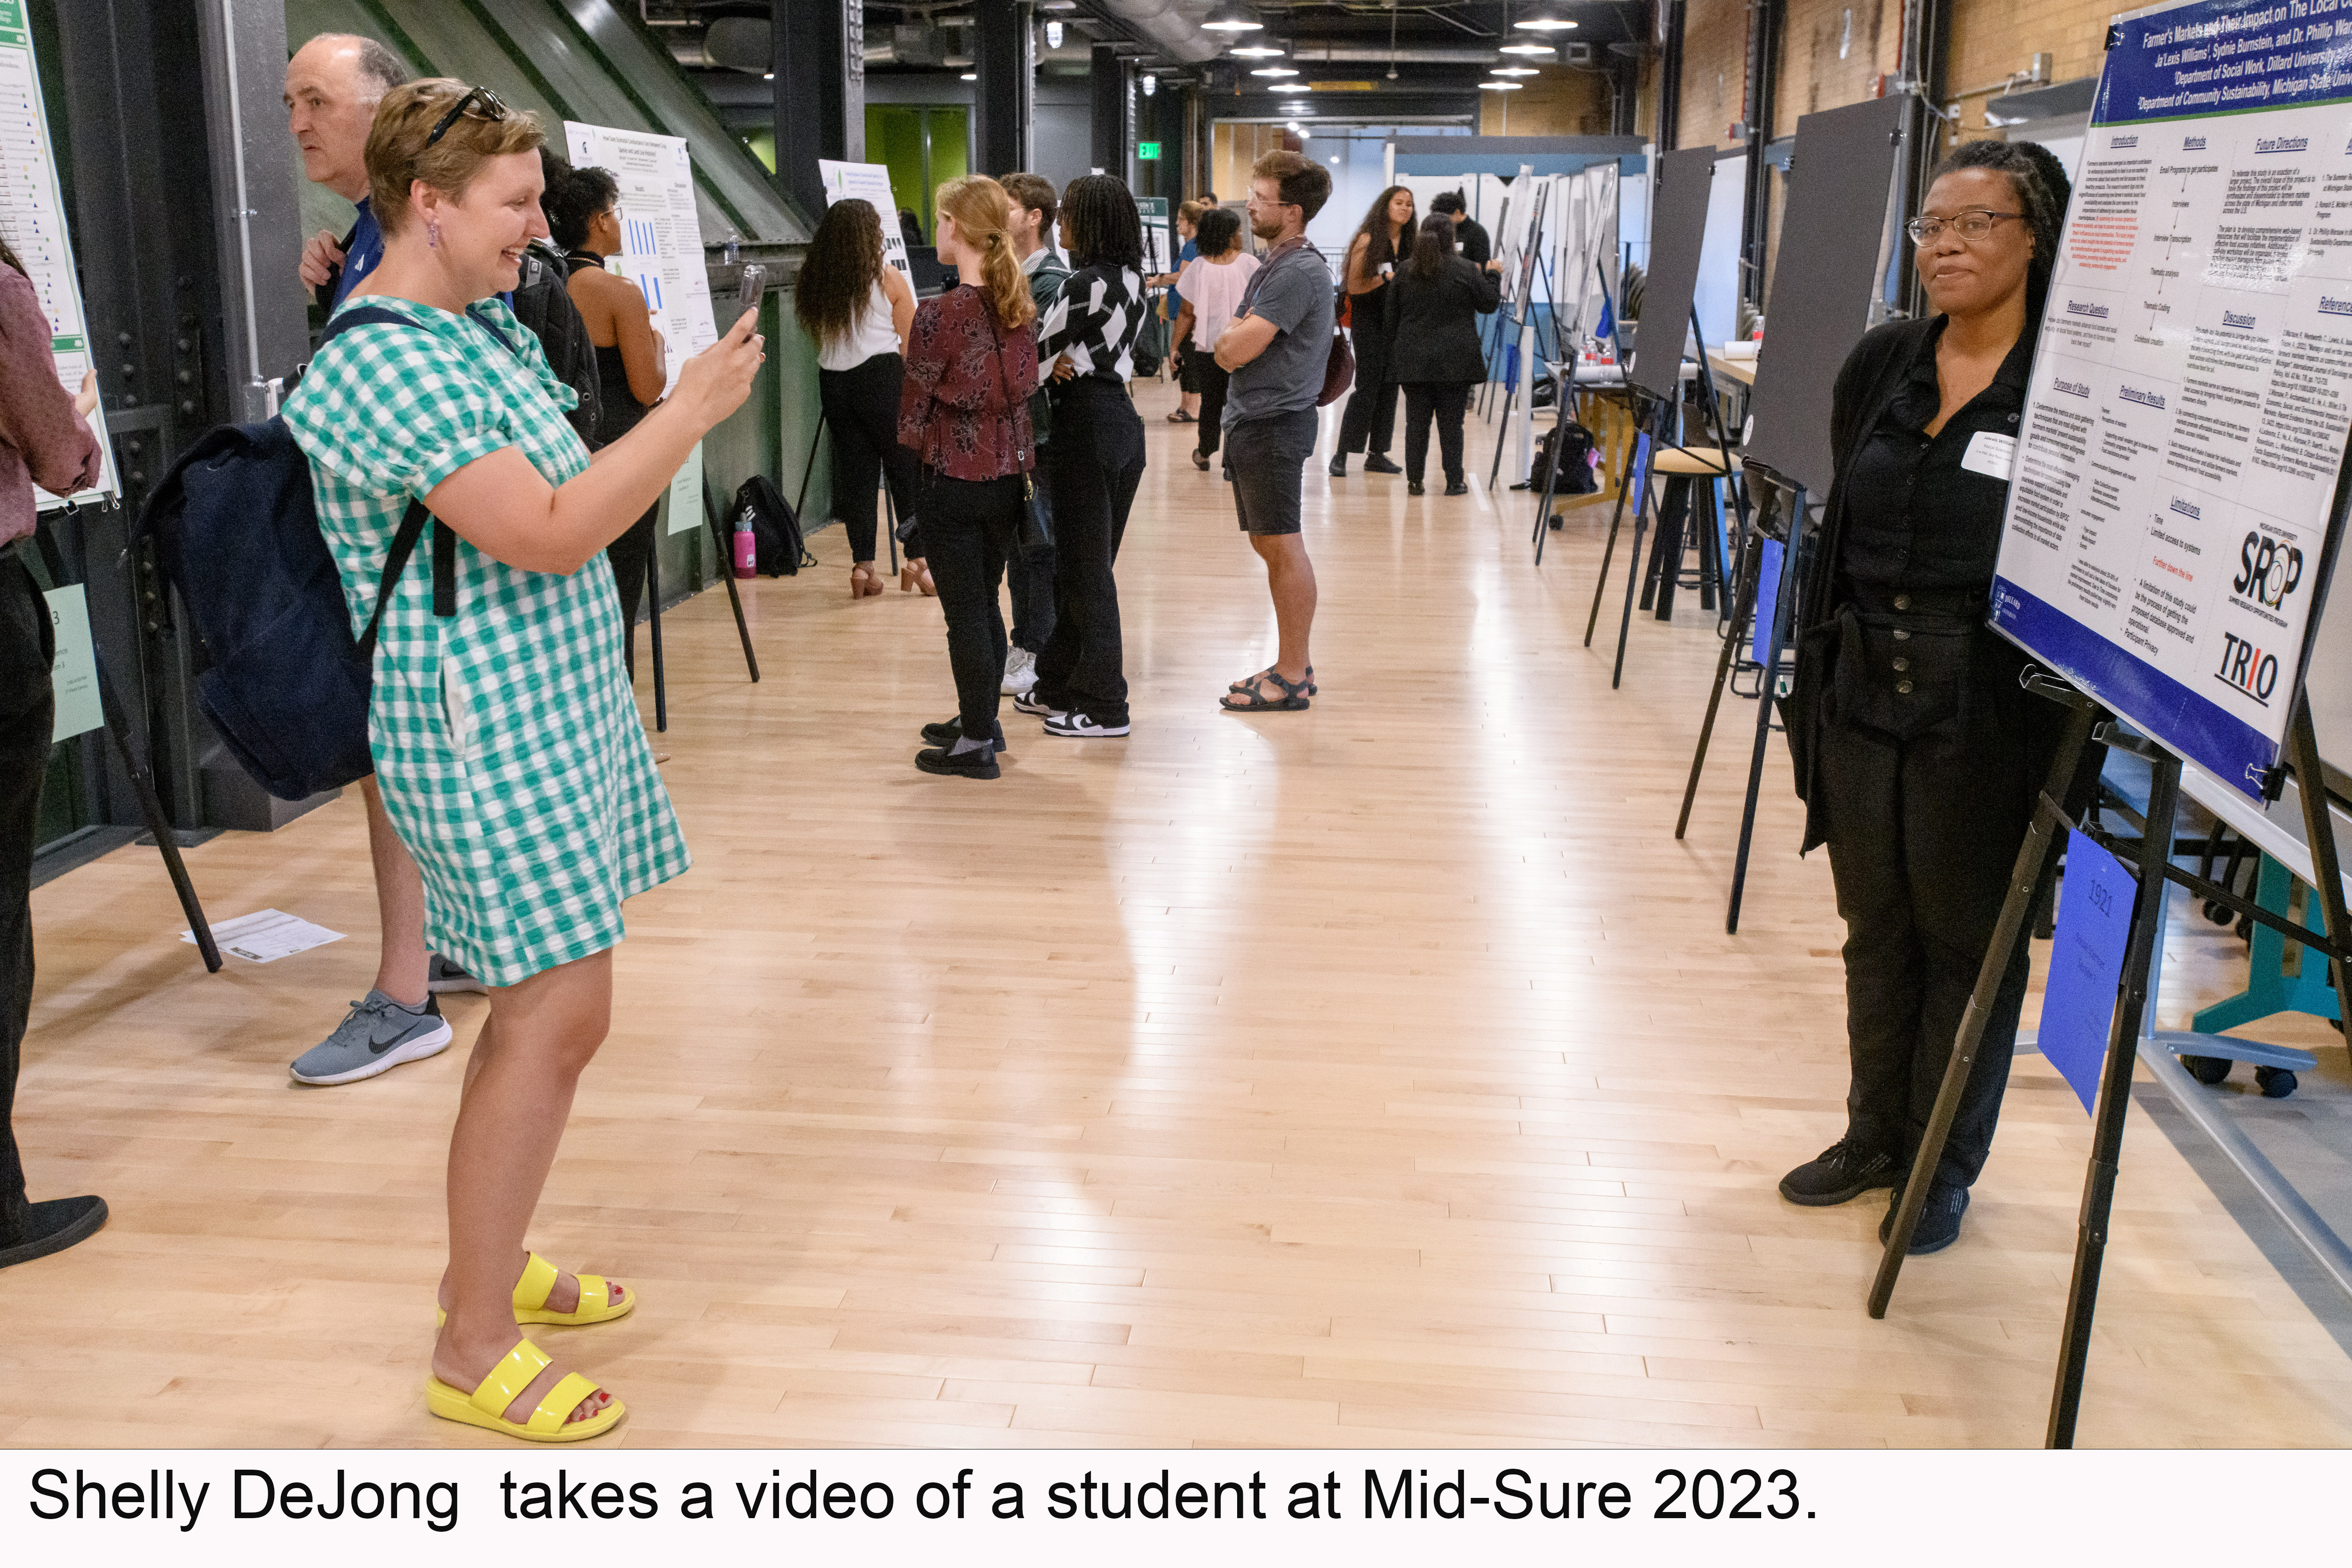 Shelly DeJong taking a video of a student at Mid-Sure 2023.